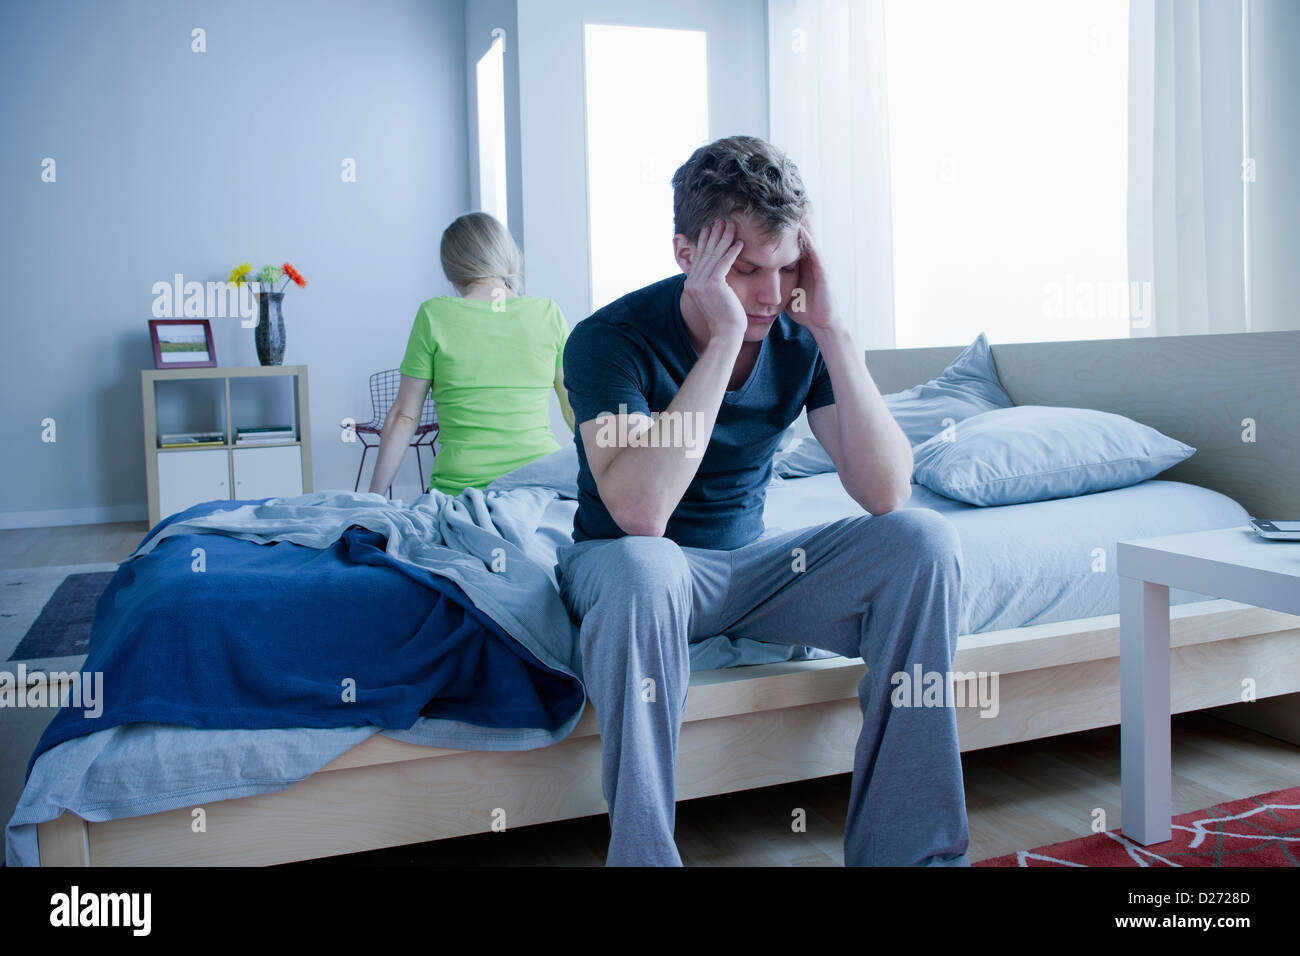 Angry couple sitting on bed Stock Photo